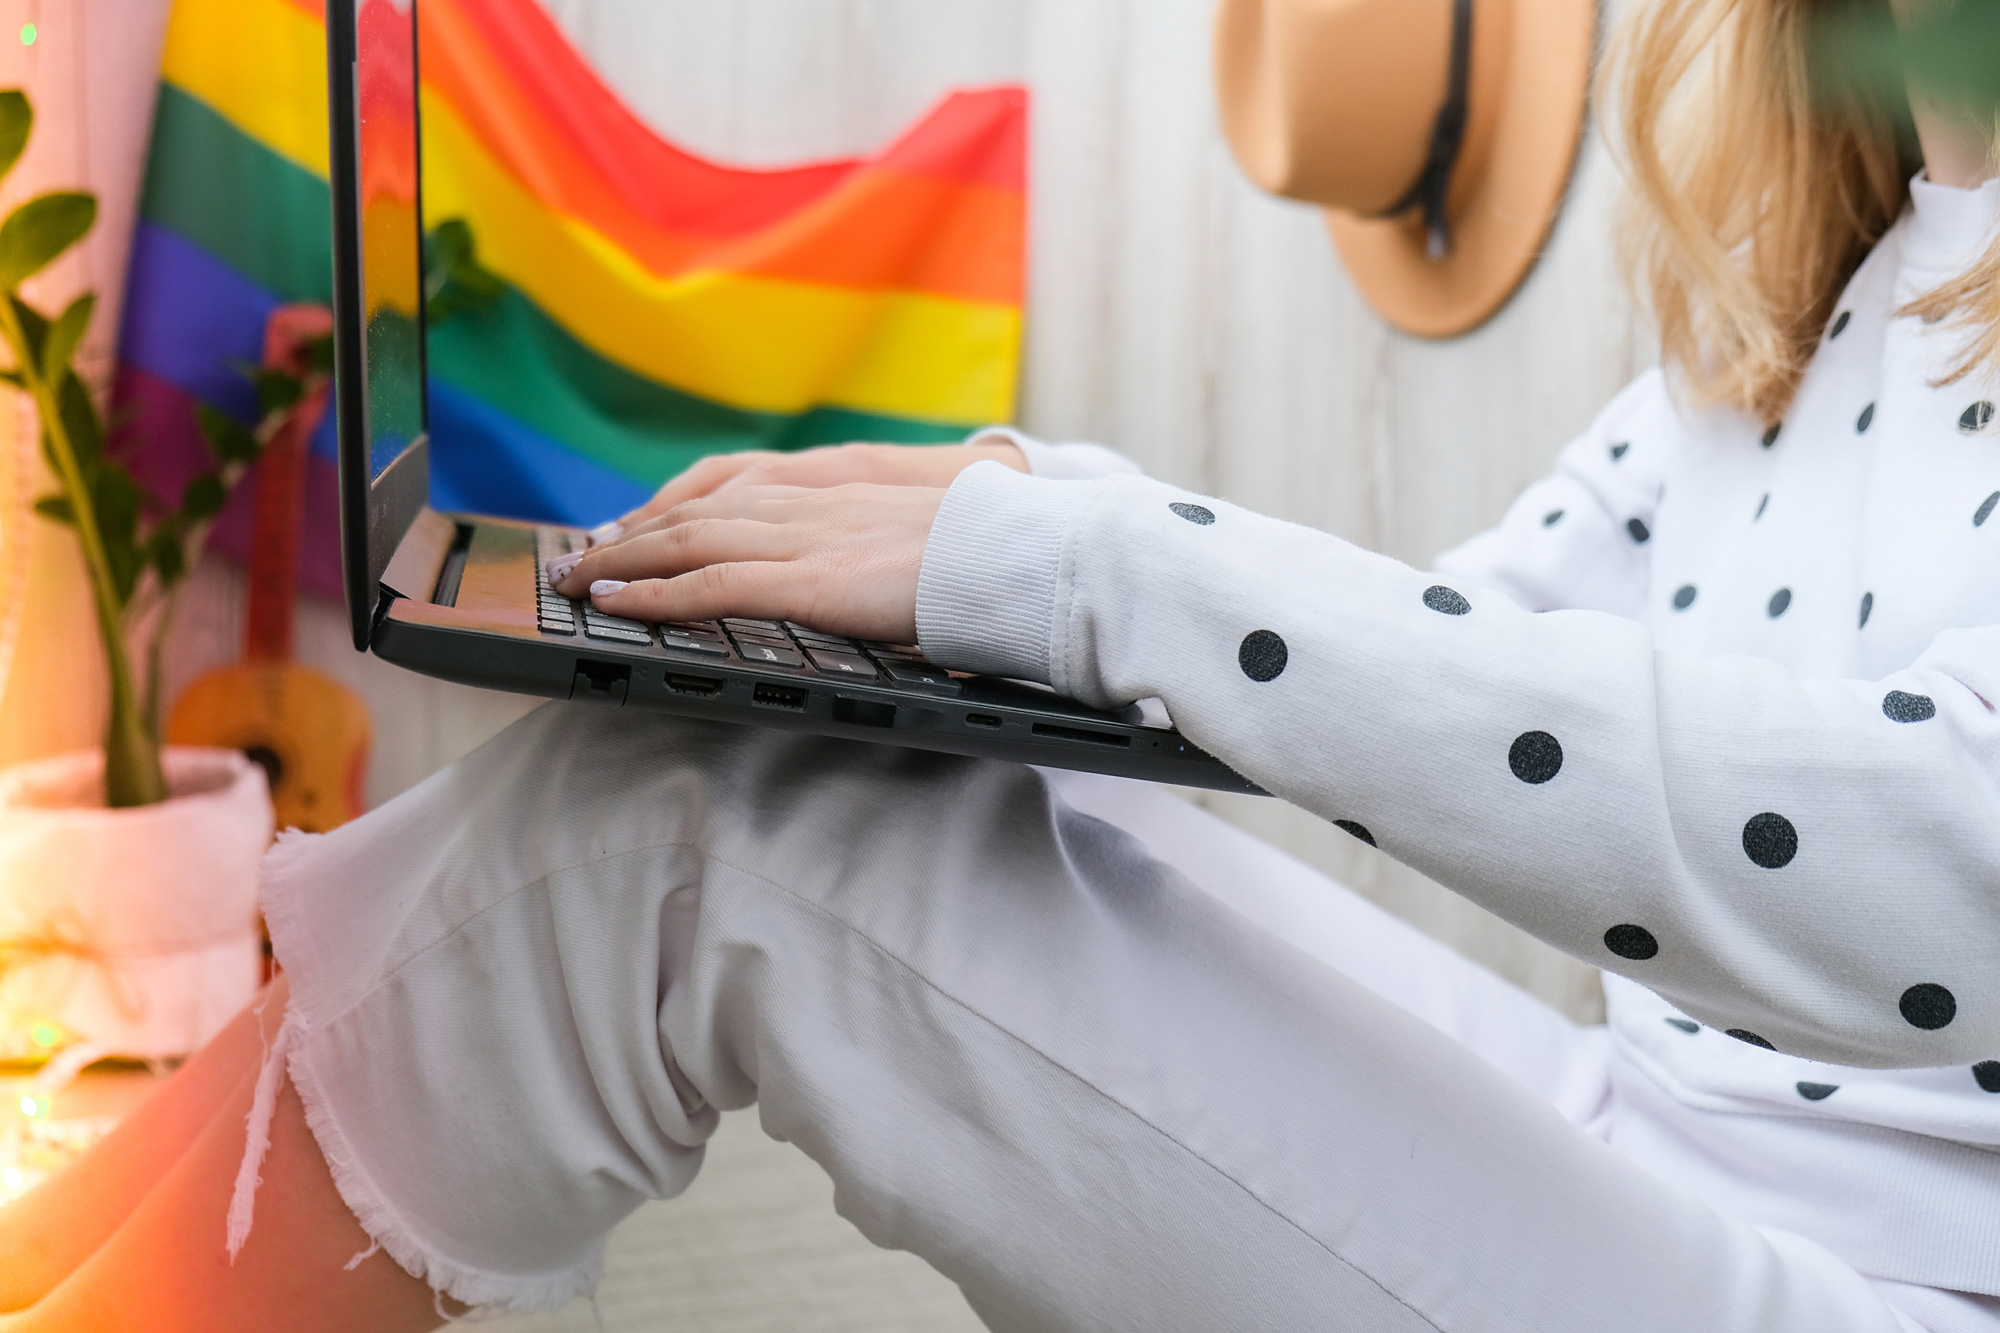 Hybrid work environments are a haven for LGBTQIA+ wellbeing